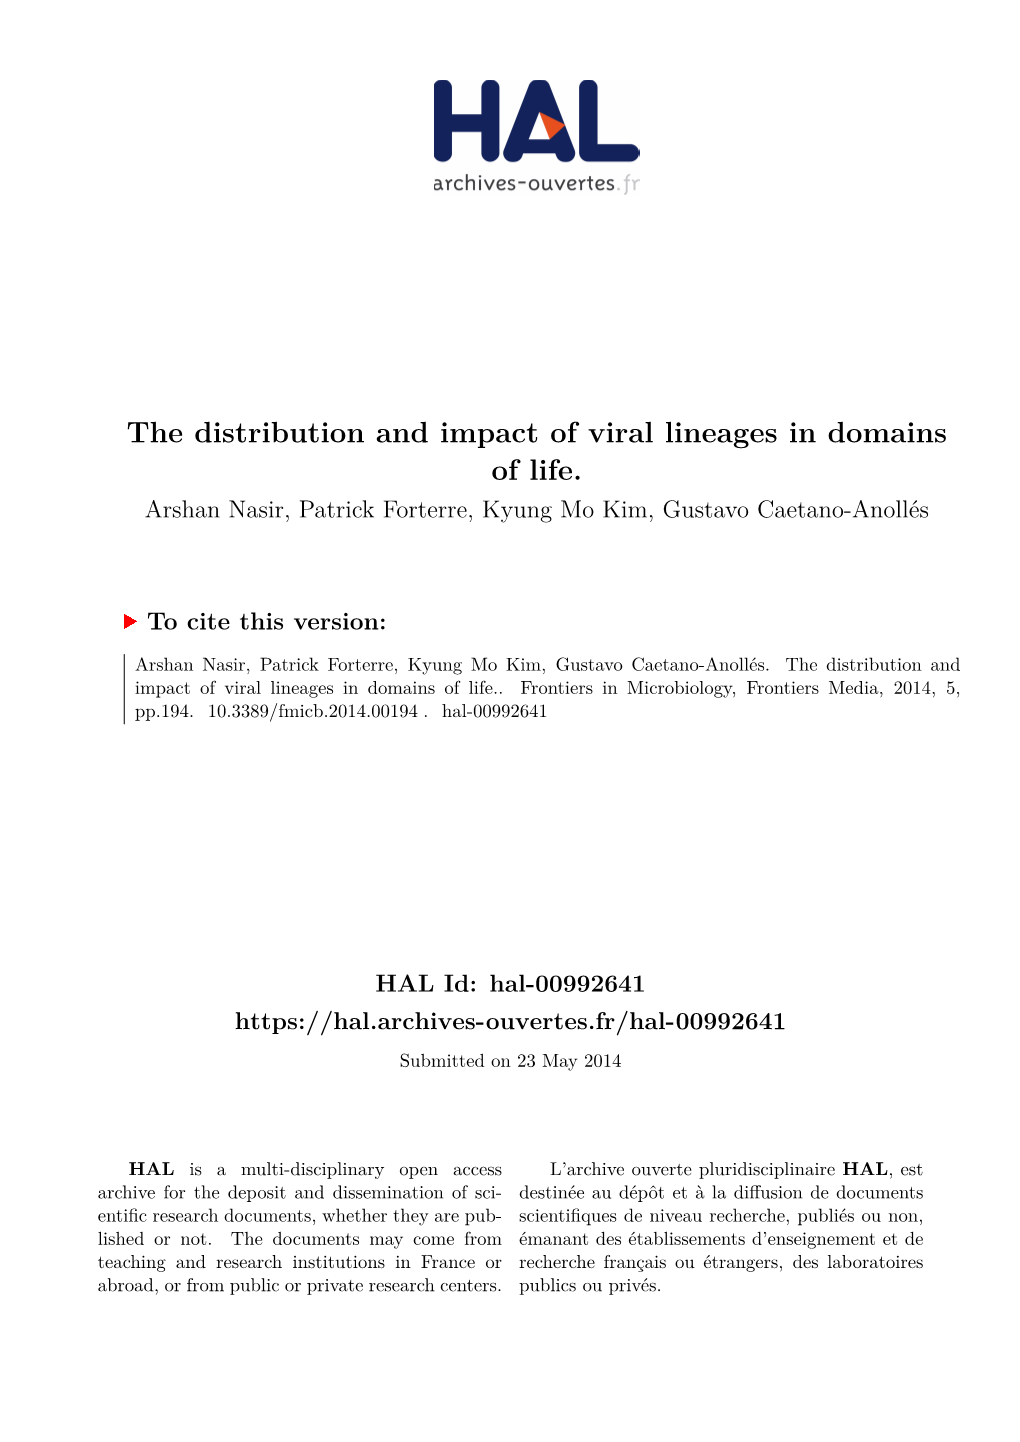 The Distribution and Impact of Viral Lineages in Domains of Life. Arshan Nasir, Patrick Forterre, Kyung Mo Kim, Gustavo Caetano-Anollés